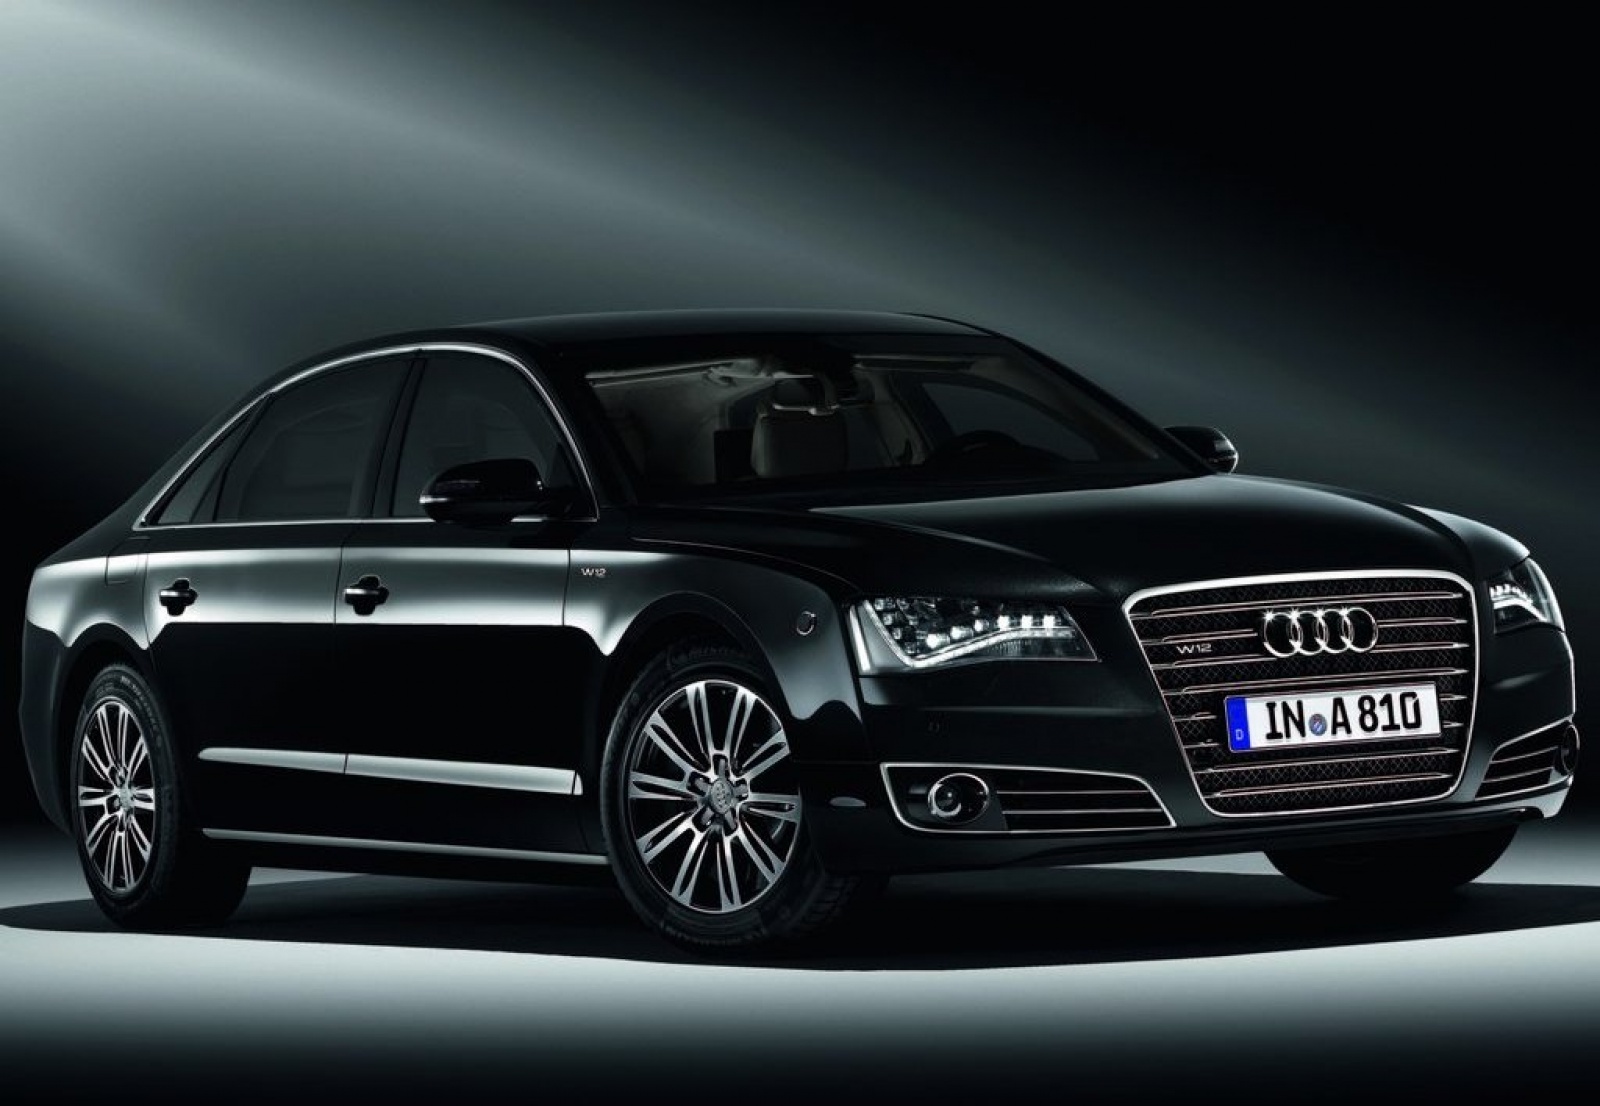 Audi A8 L Security 2012 Wallpapers   9114